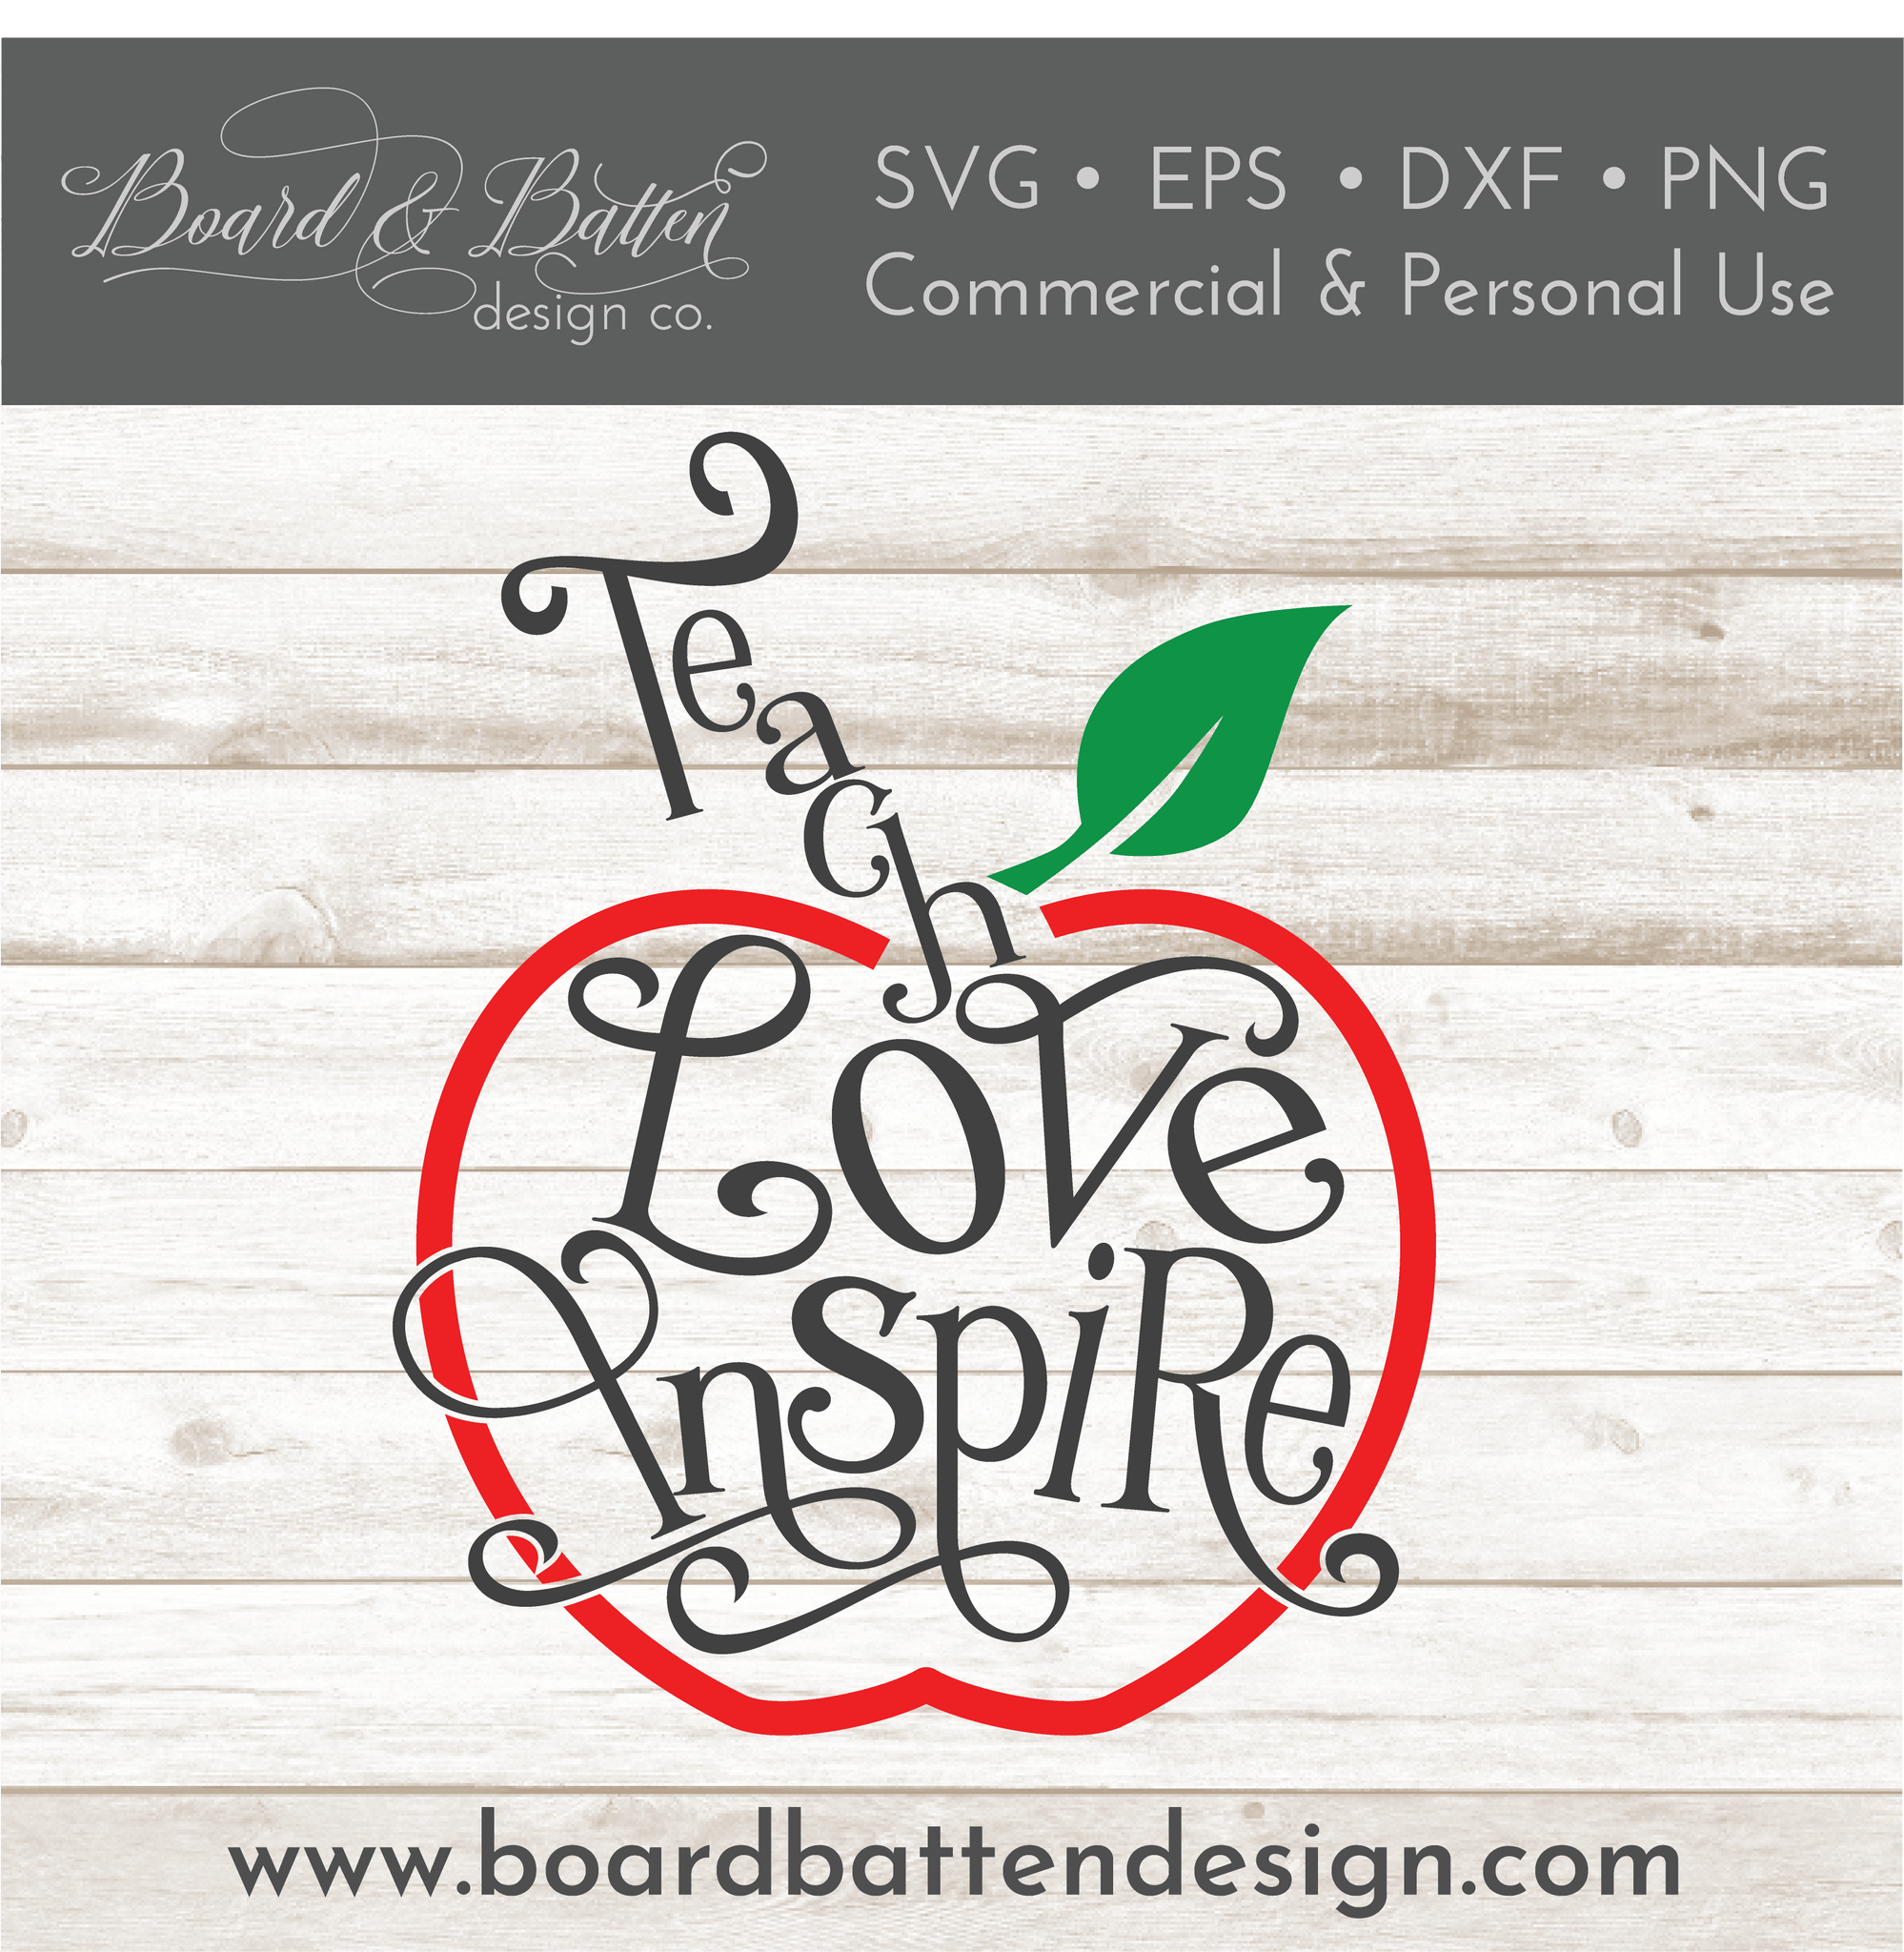 Teach Love Inspire SVG File - Commercial Use SVG Files for Cricut & Silhouette